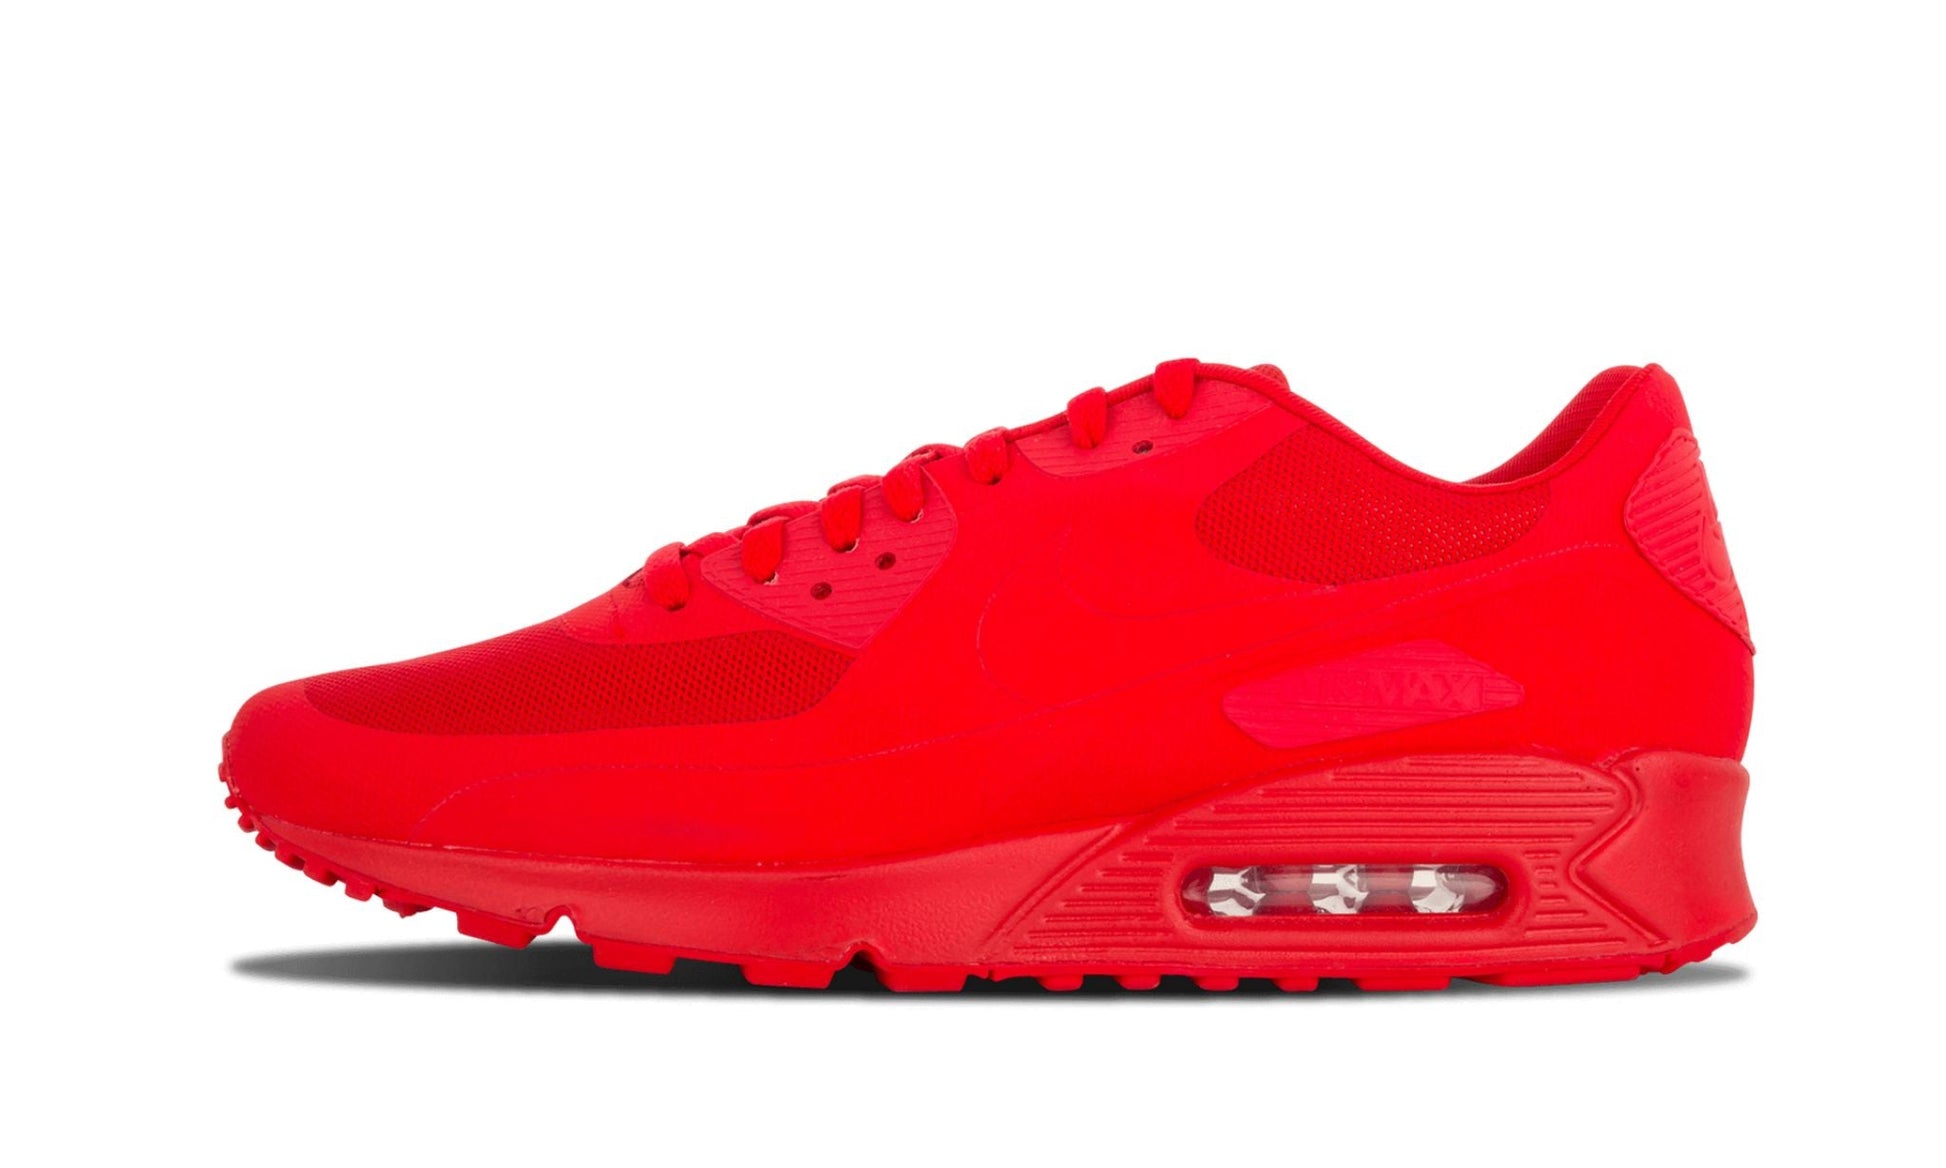 Air Max 90 HYP QS "Independence Day"